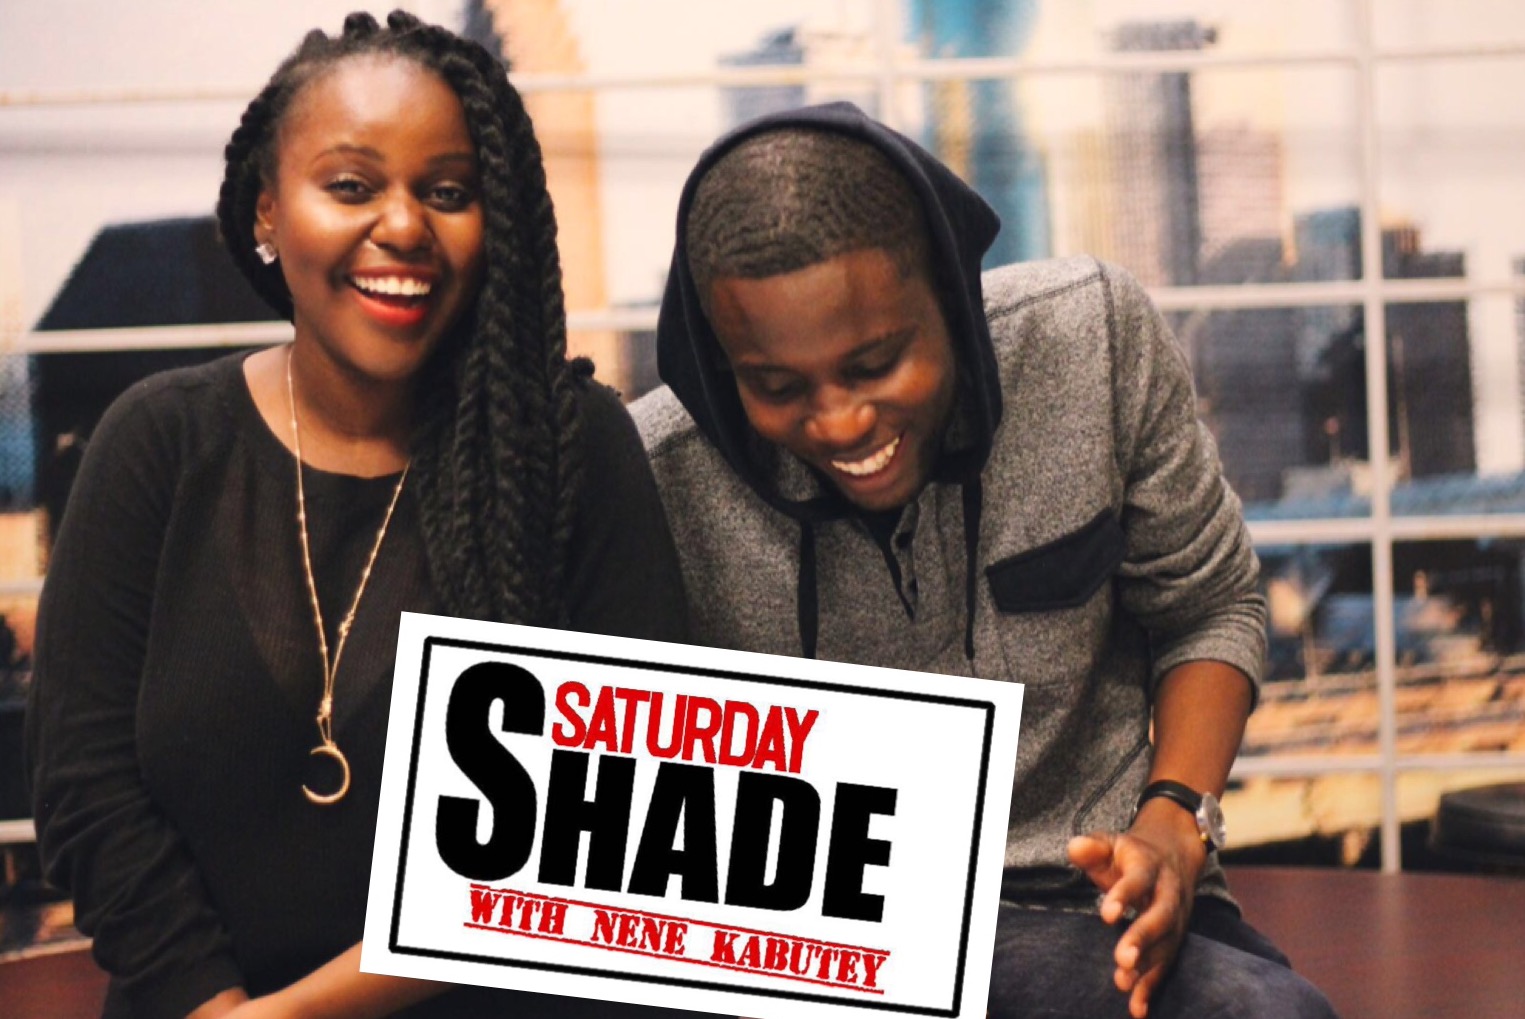 the Saturday shade with nene kabutey is a funny and entertaining podcast